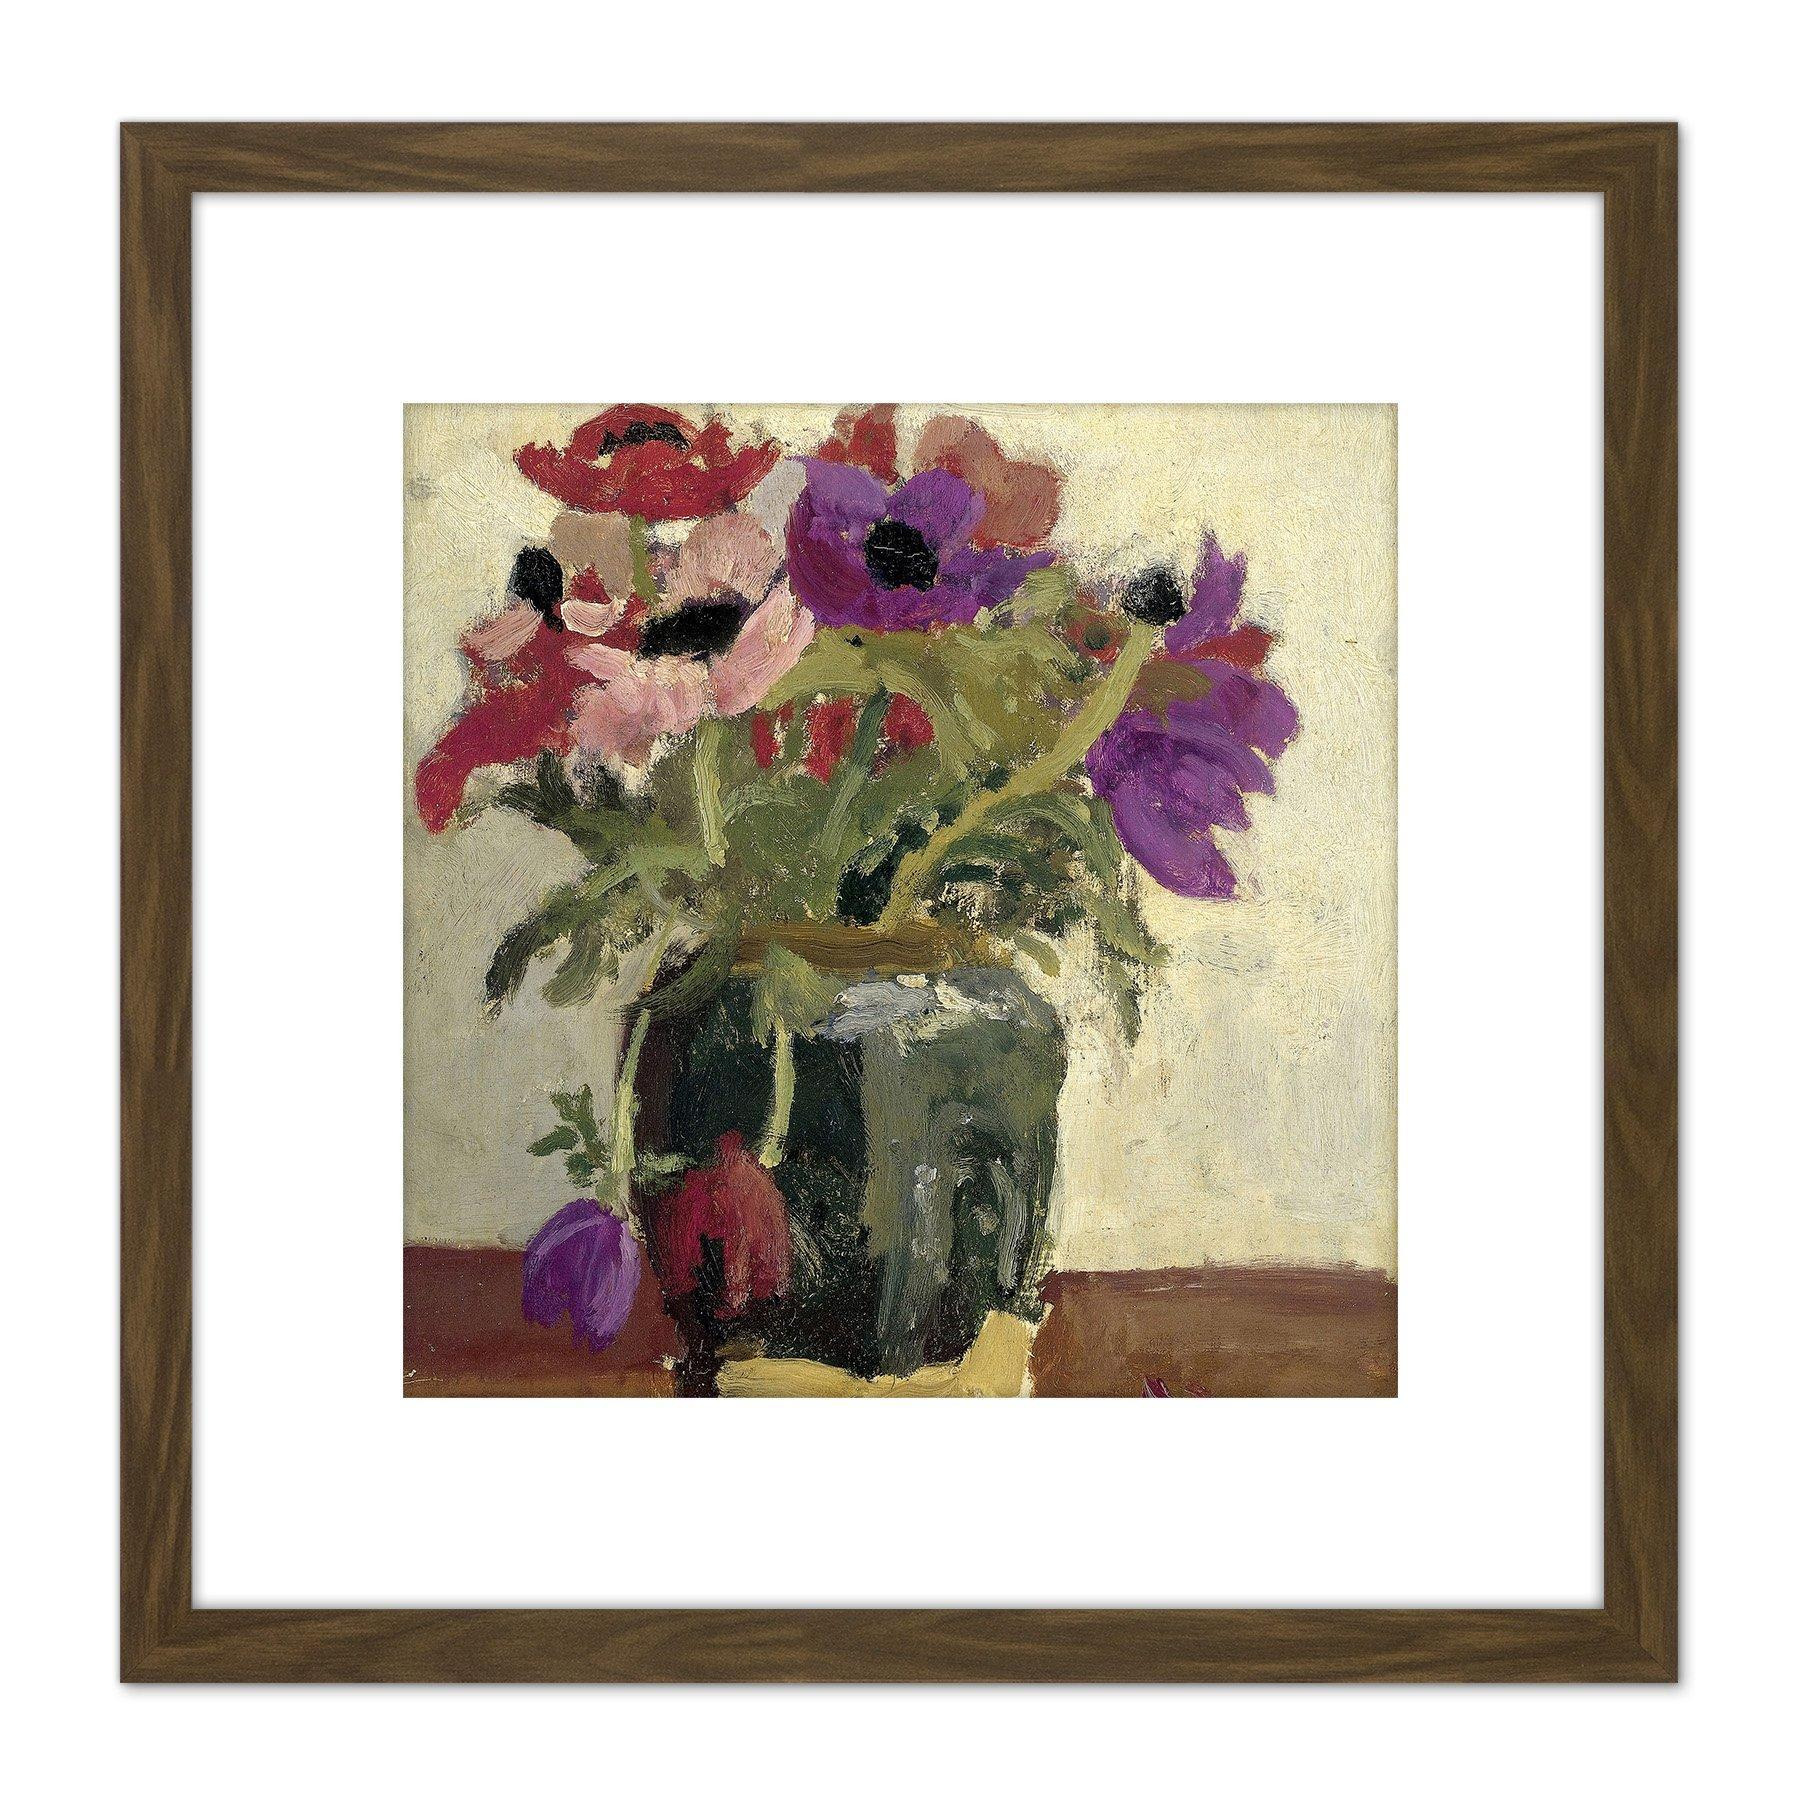 Breitner Ginger Pot With Anemones Painting 8X8 Inch Square Wooden Framed Wall Art Print Picture with Mount - image 1